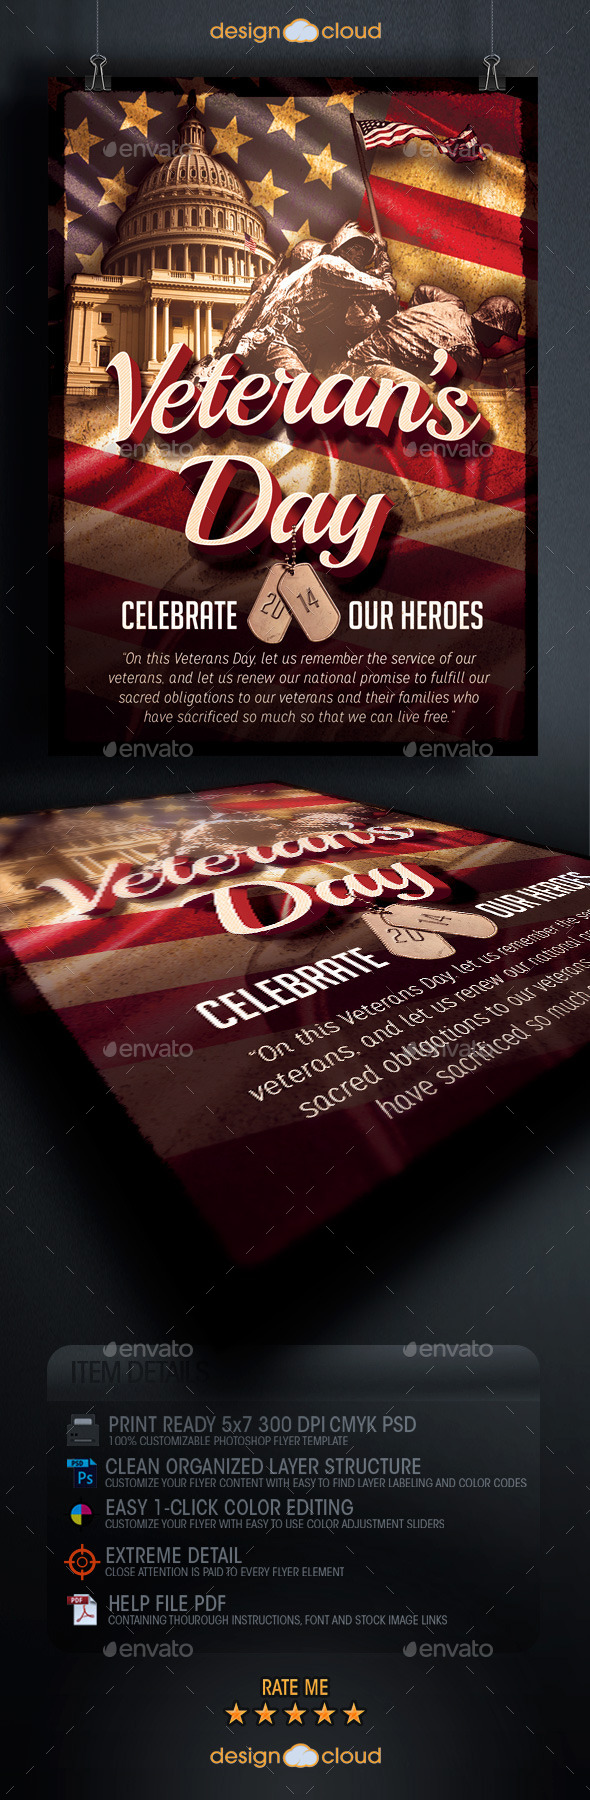 Veteran's Day Flyer Template by DesignCloud GraphicRiver